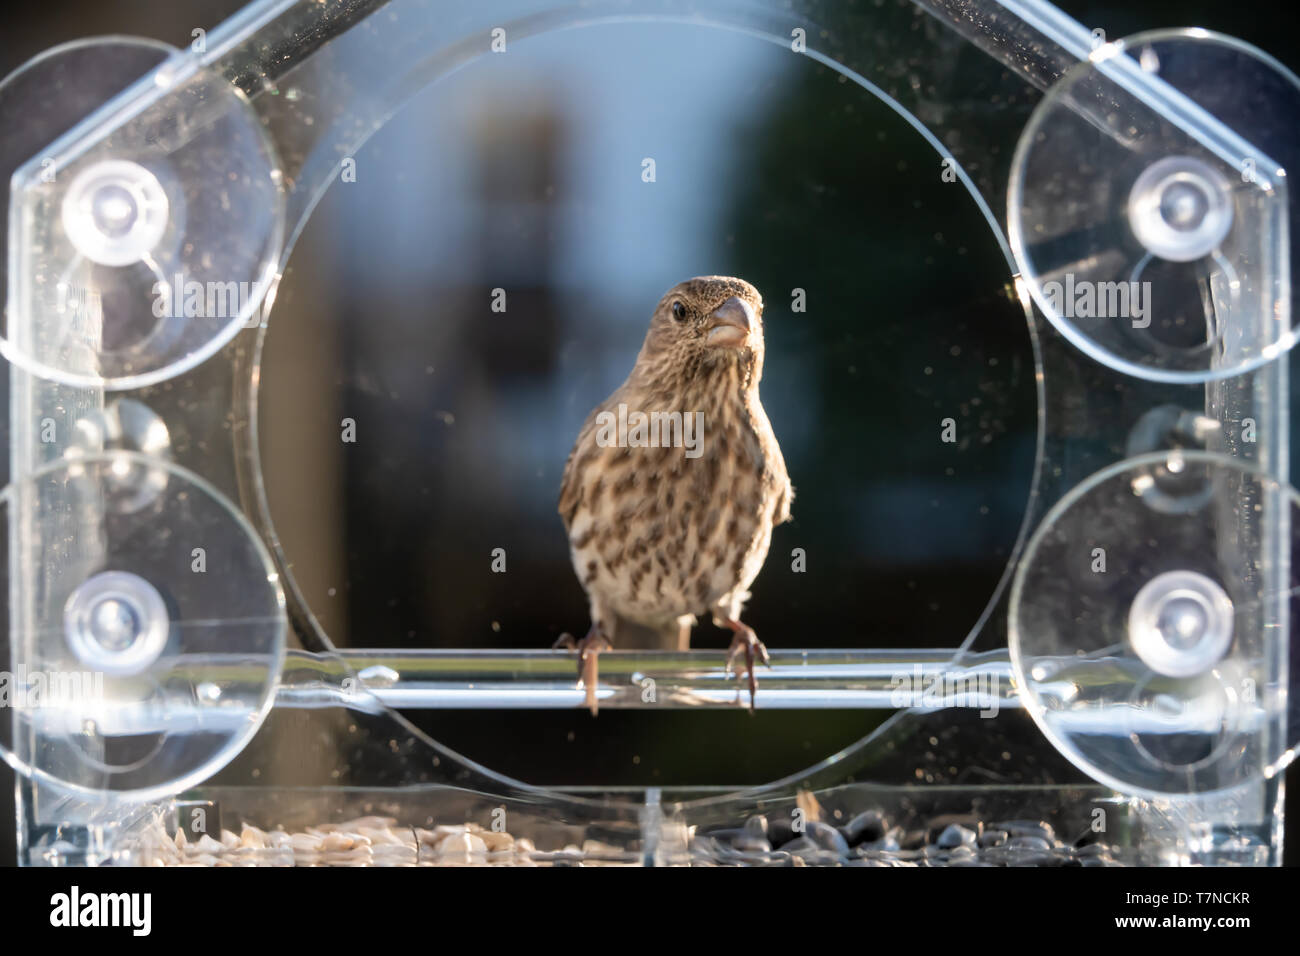 One female house finch bird perched on plastic glass window feeder looking up in Virginia eating sunflower seeds Stock Photo